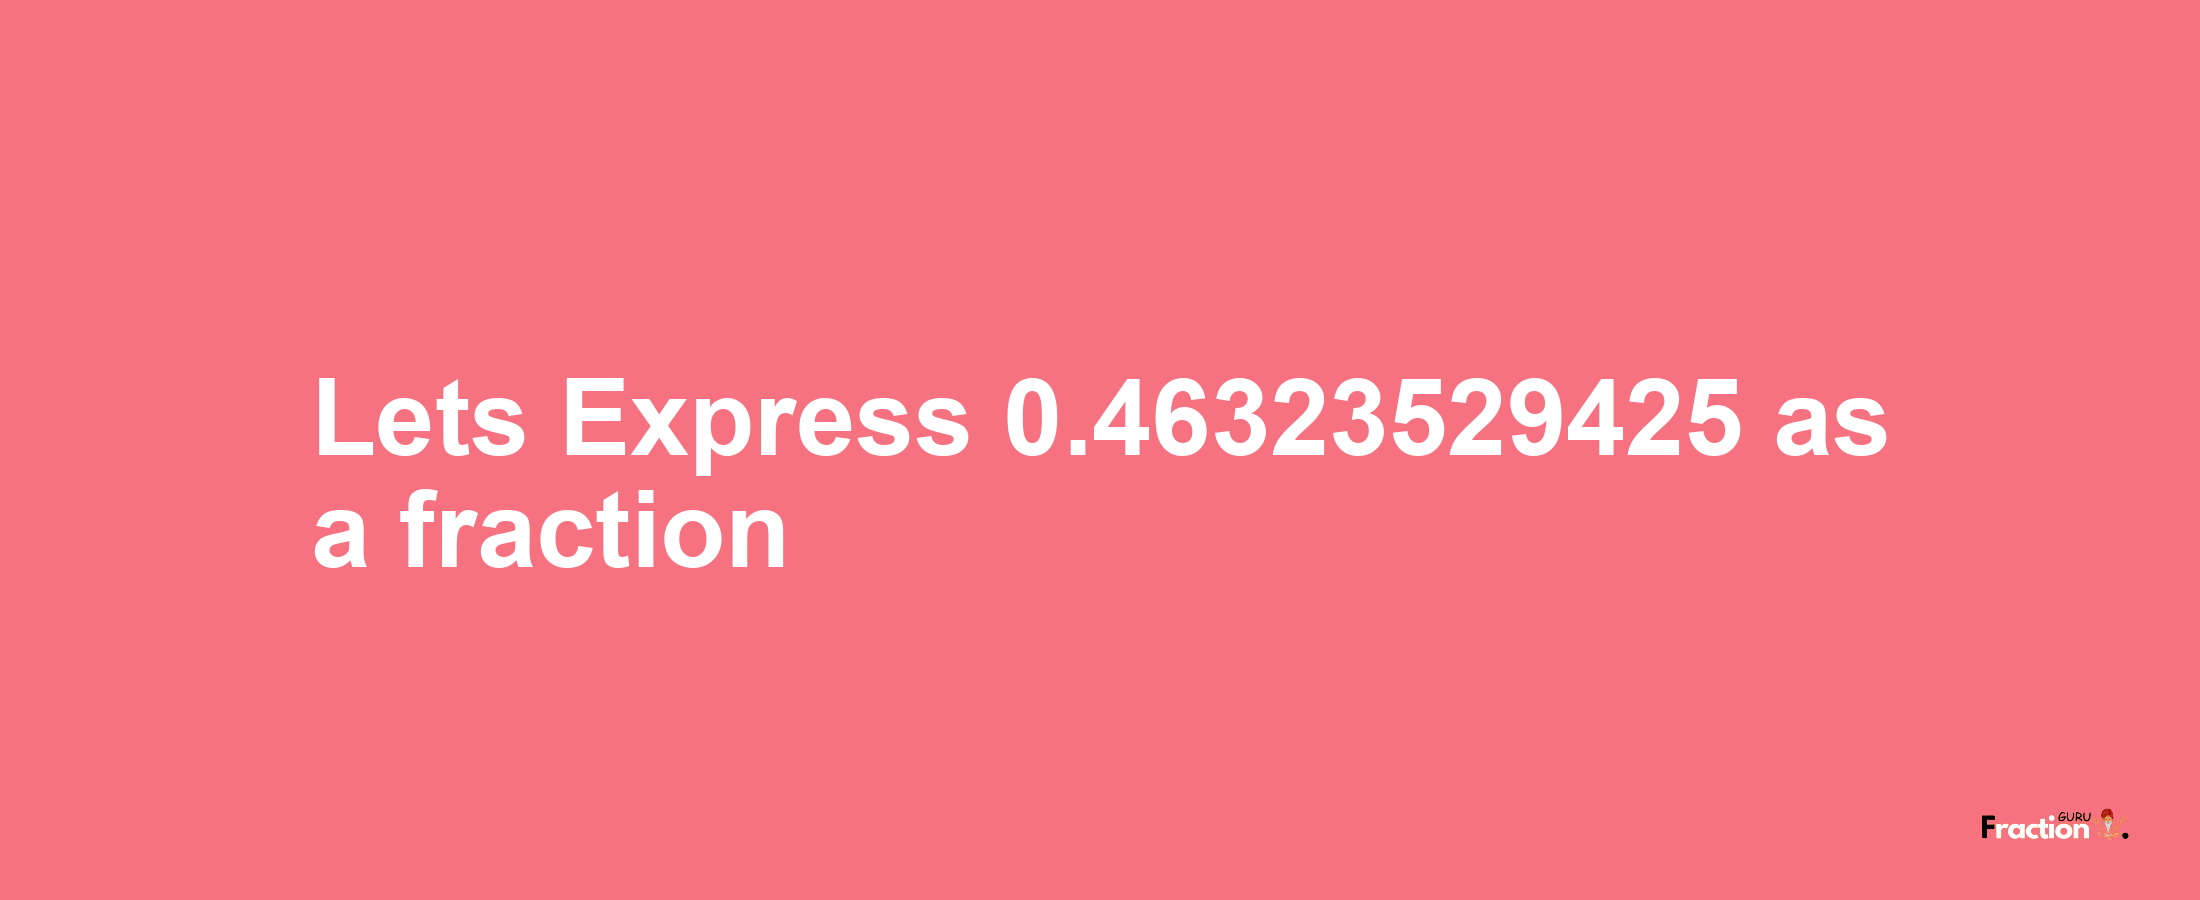 Lets Express 0.46323529425 as afraction